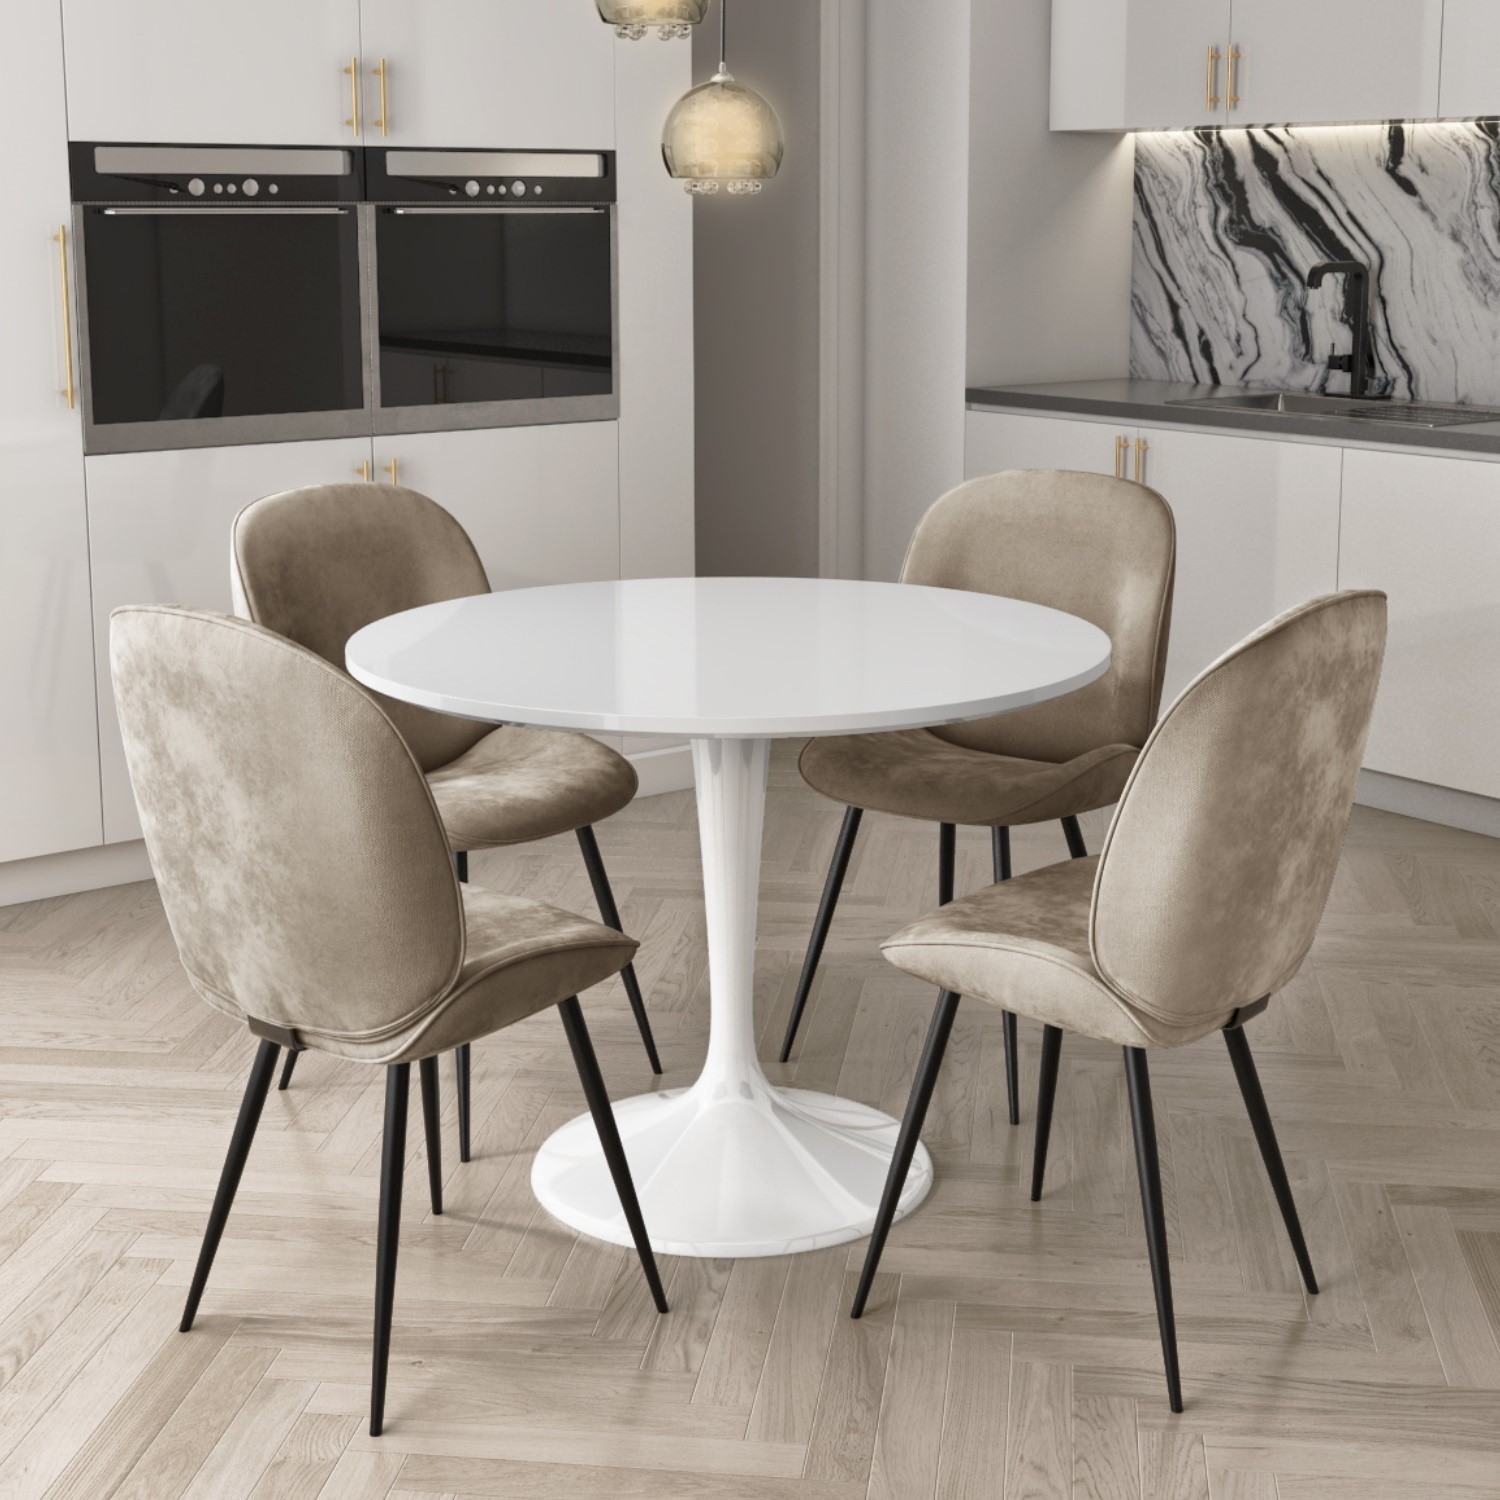 White Round High Gloss Dining Table, Round White Gloss Dining Table And Chairs